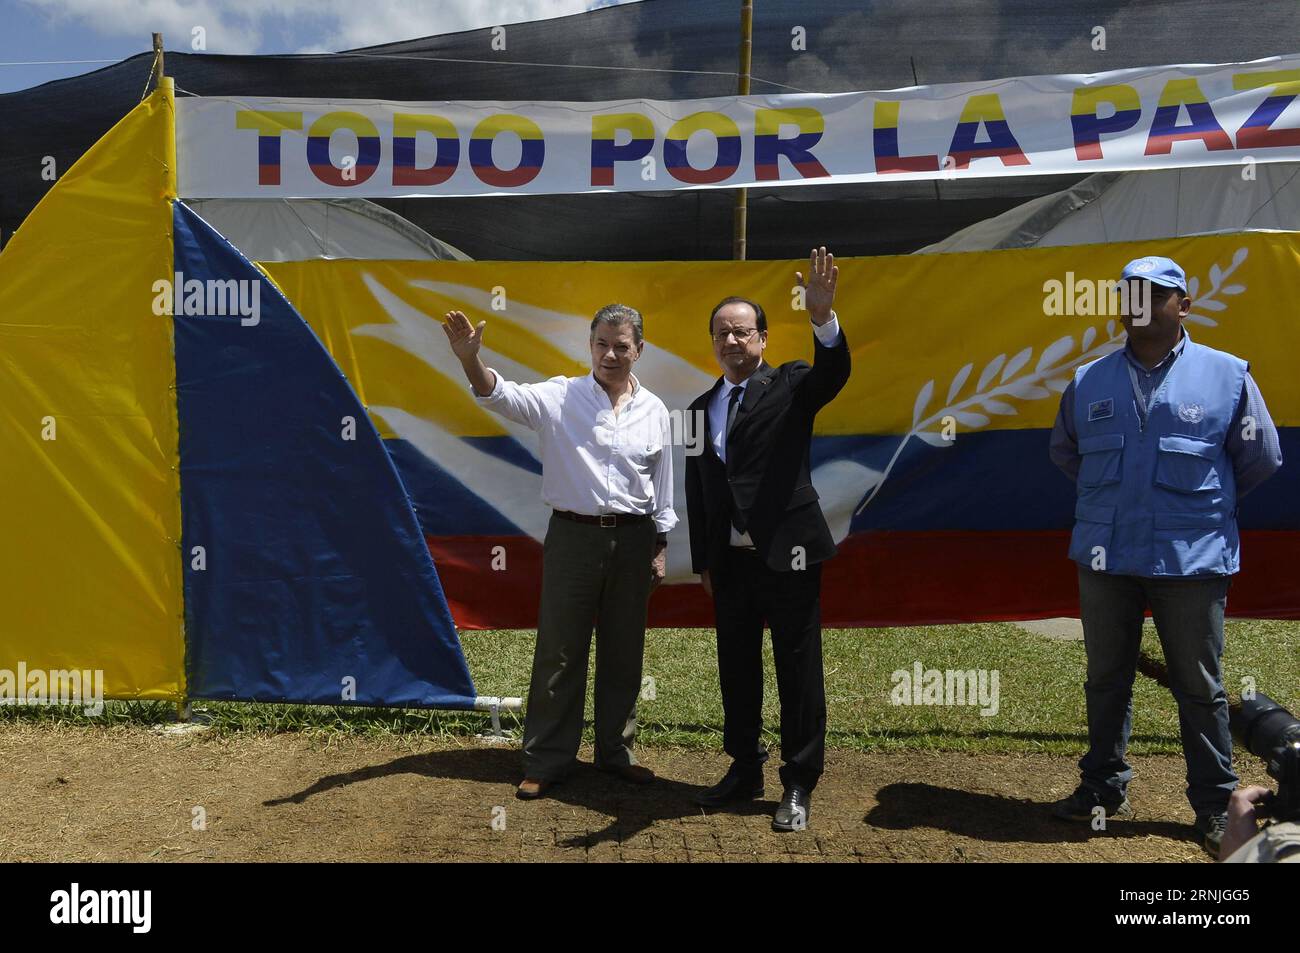 (170125) -- CAUCA, Jan. 24, 2017 -- Image provided by the Presidency of Colombia shows Colombian President Juan Manuel Santos (L) and French President Francois Hollande (C) visiting the demobilization camp in La Venta, the municipality of Caldono, Colombia, on Jan. 24, 2017. Juan David Tena/Colombia s Presidency) (ma) (da)(gj) COLOMBIA-CALDONO-FRANCE-POLITICS-VISIT COLOMBIANxPRESIDENCY PUBLICATIONxNOTxINxCHN   Cauca Jan 24 2017 Image provided by The Presidency of Colombia Shows Colombian President Juan Manuel Santos l and French President François Hollande C Visiting The Demobilization Camp in Stock Photo